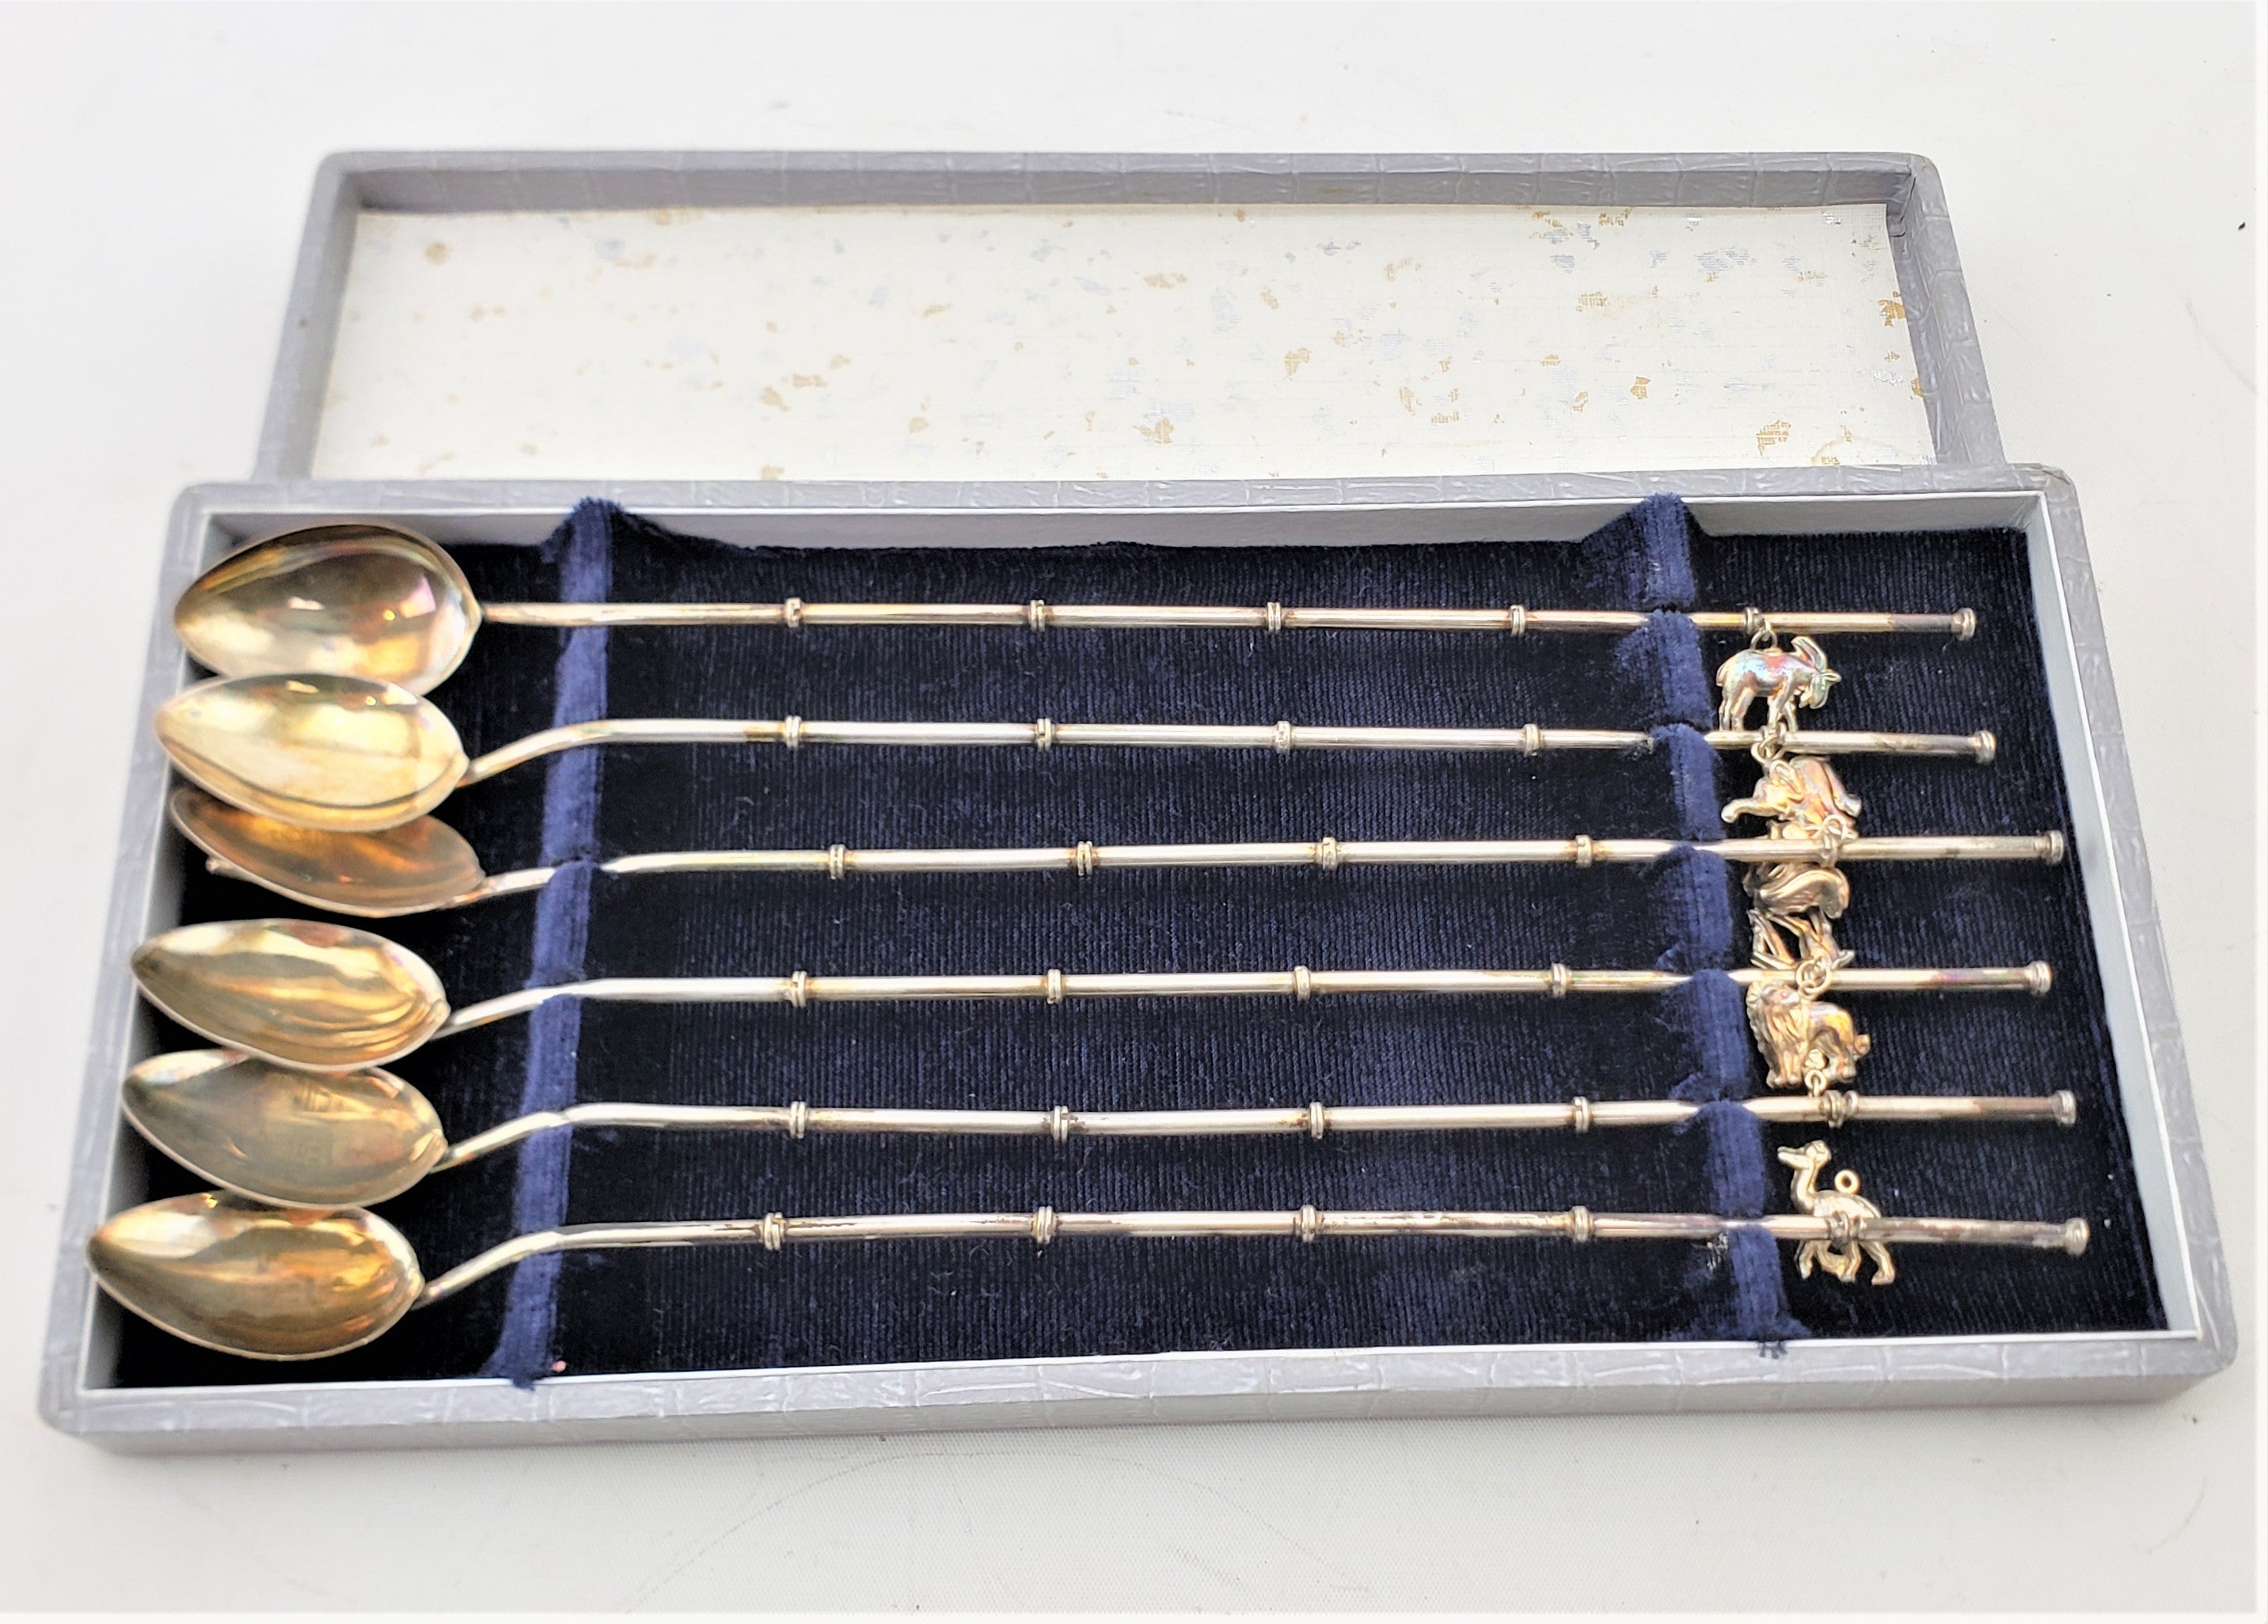 This boxed set of six sipping straw cocktail or ice tea spoons are unsigned, but presumed to have originated from Germany and date to approximately 1960 and done in the period Mid-Century Modern style. The spoons are composed of a combination of